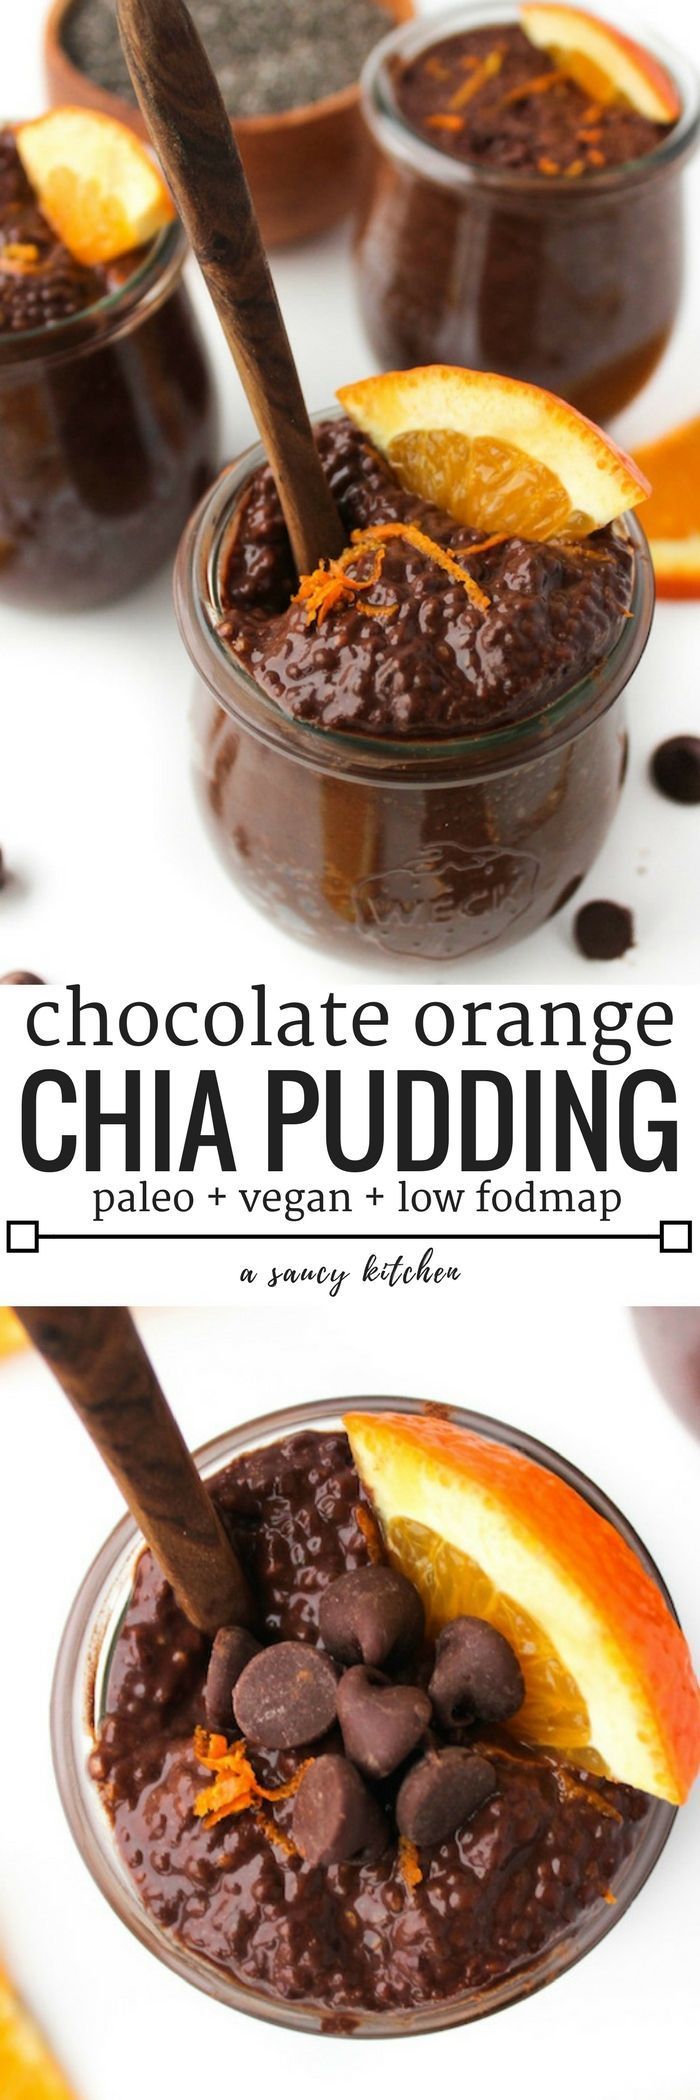 Chocolate Orange Chia Pudding | whipped together in a pinch and is perfect for breakfast and dessert alike. | Paleo, Vegan, Low